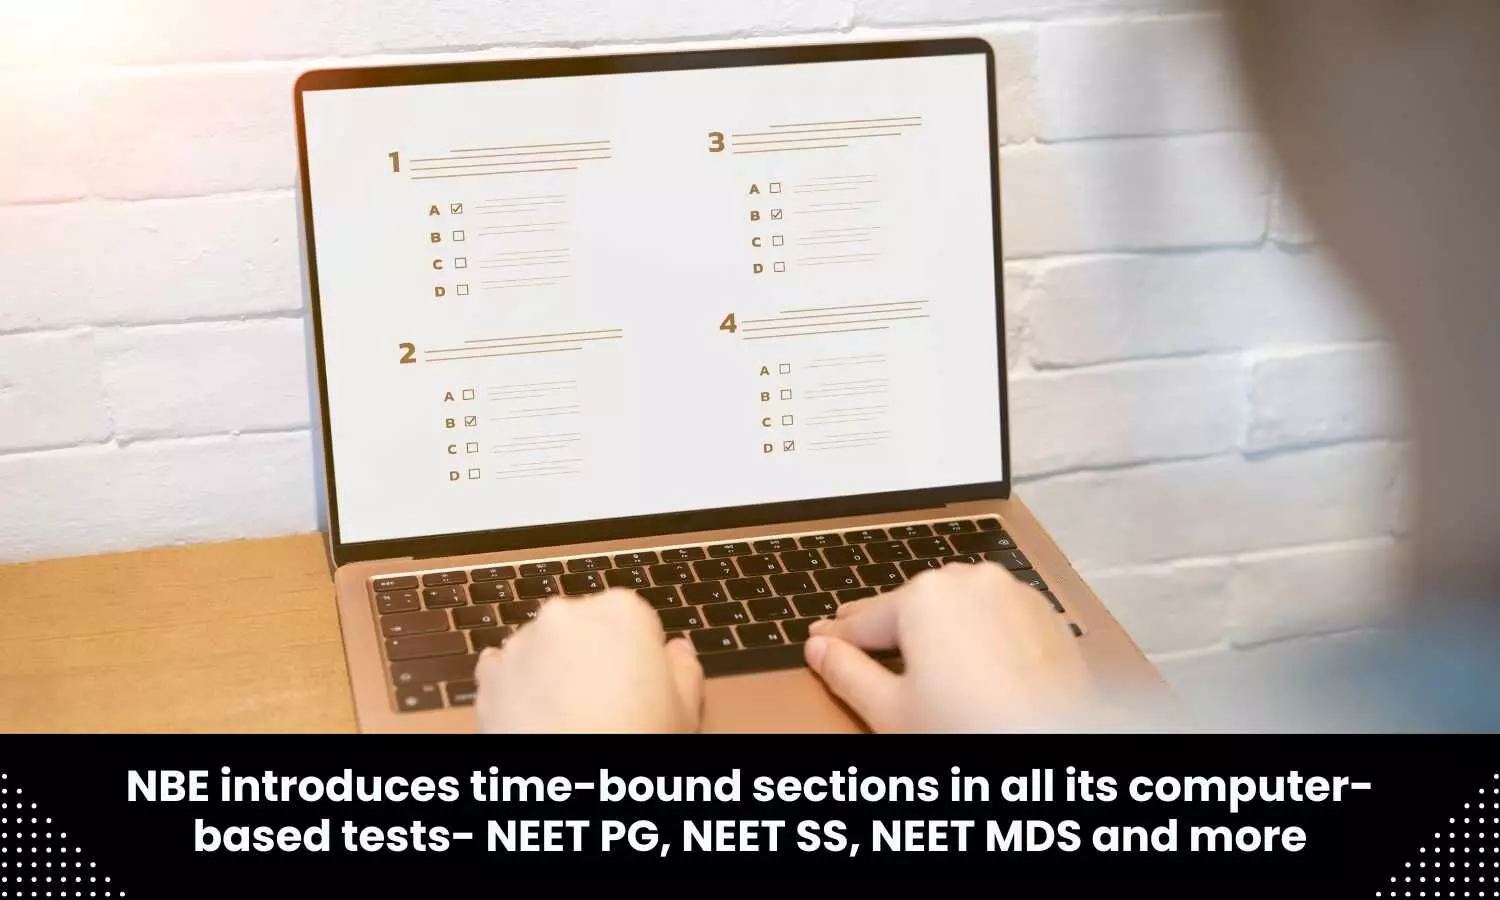 NBE introduces time-bound sections in all its computer-based tests- NEET PG, NEET SS, NEET MDS and more